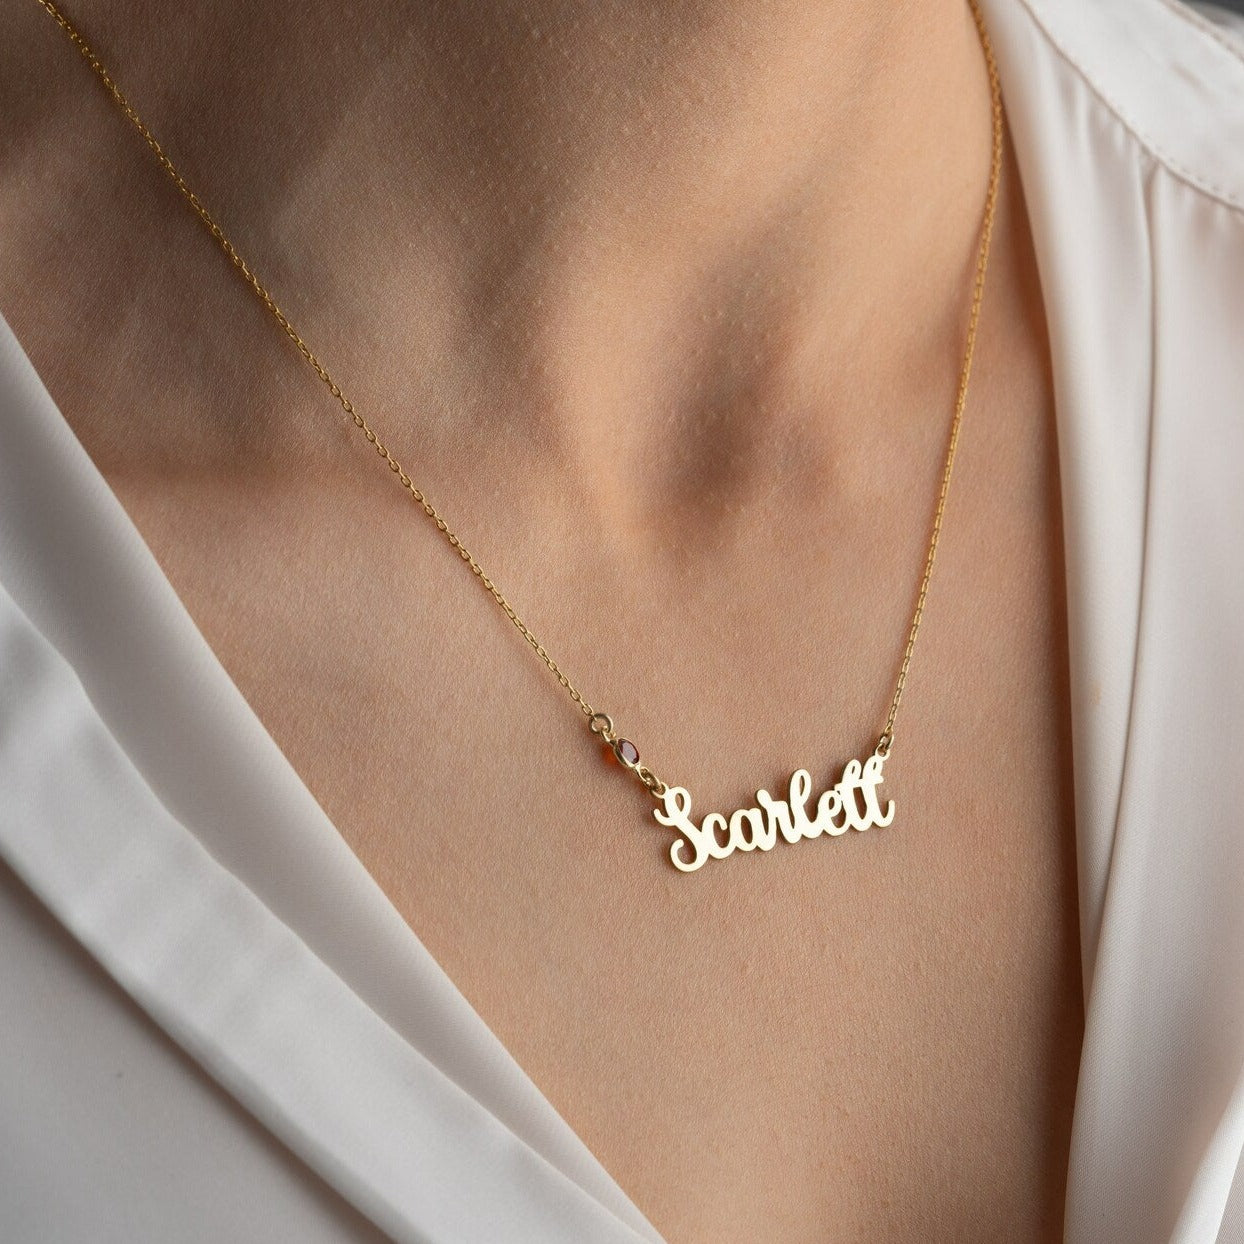 Upgrade your jewelry collection with the best gold necklaces for women in Dubai. Enhance your style and make a statement with these timeless pieces. Shop now and elevate your look with the perfect accessory for any occasion. Add a touch of elegance to your outfit and feel confident and beautiful.